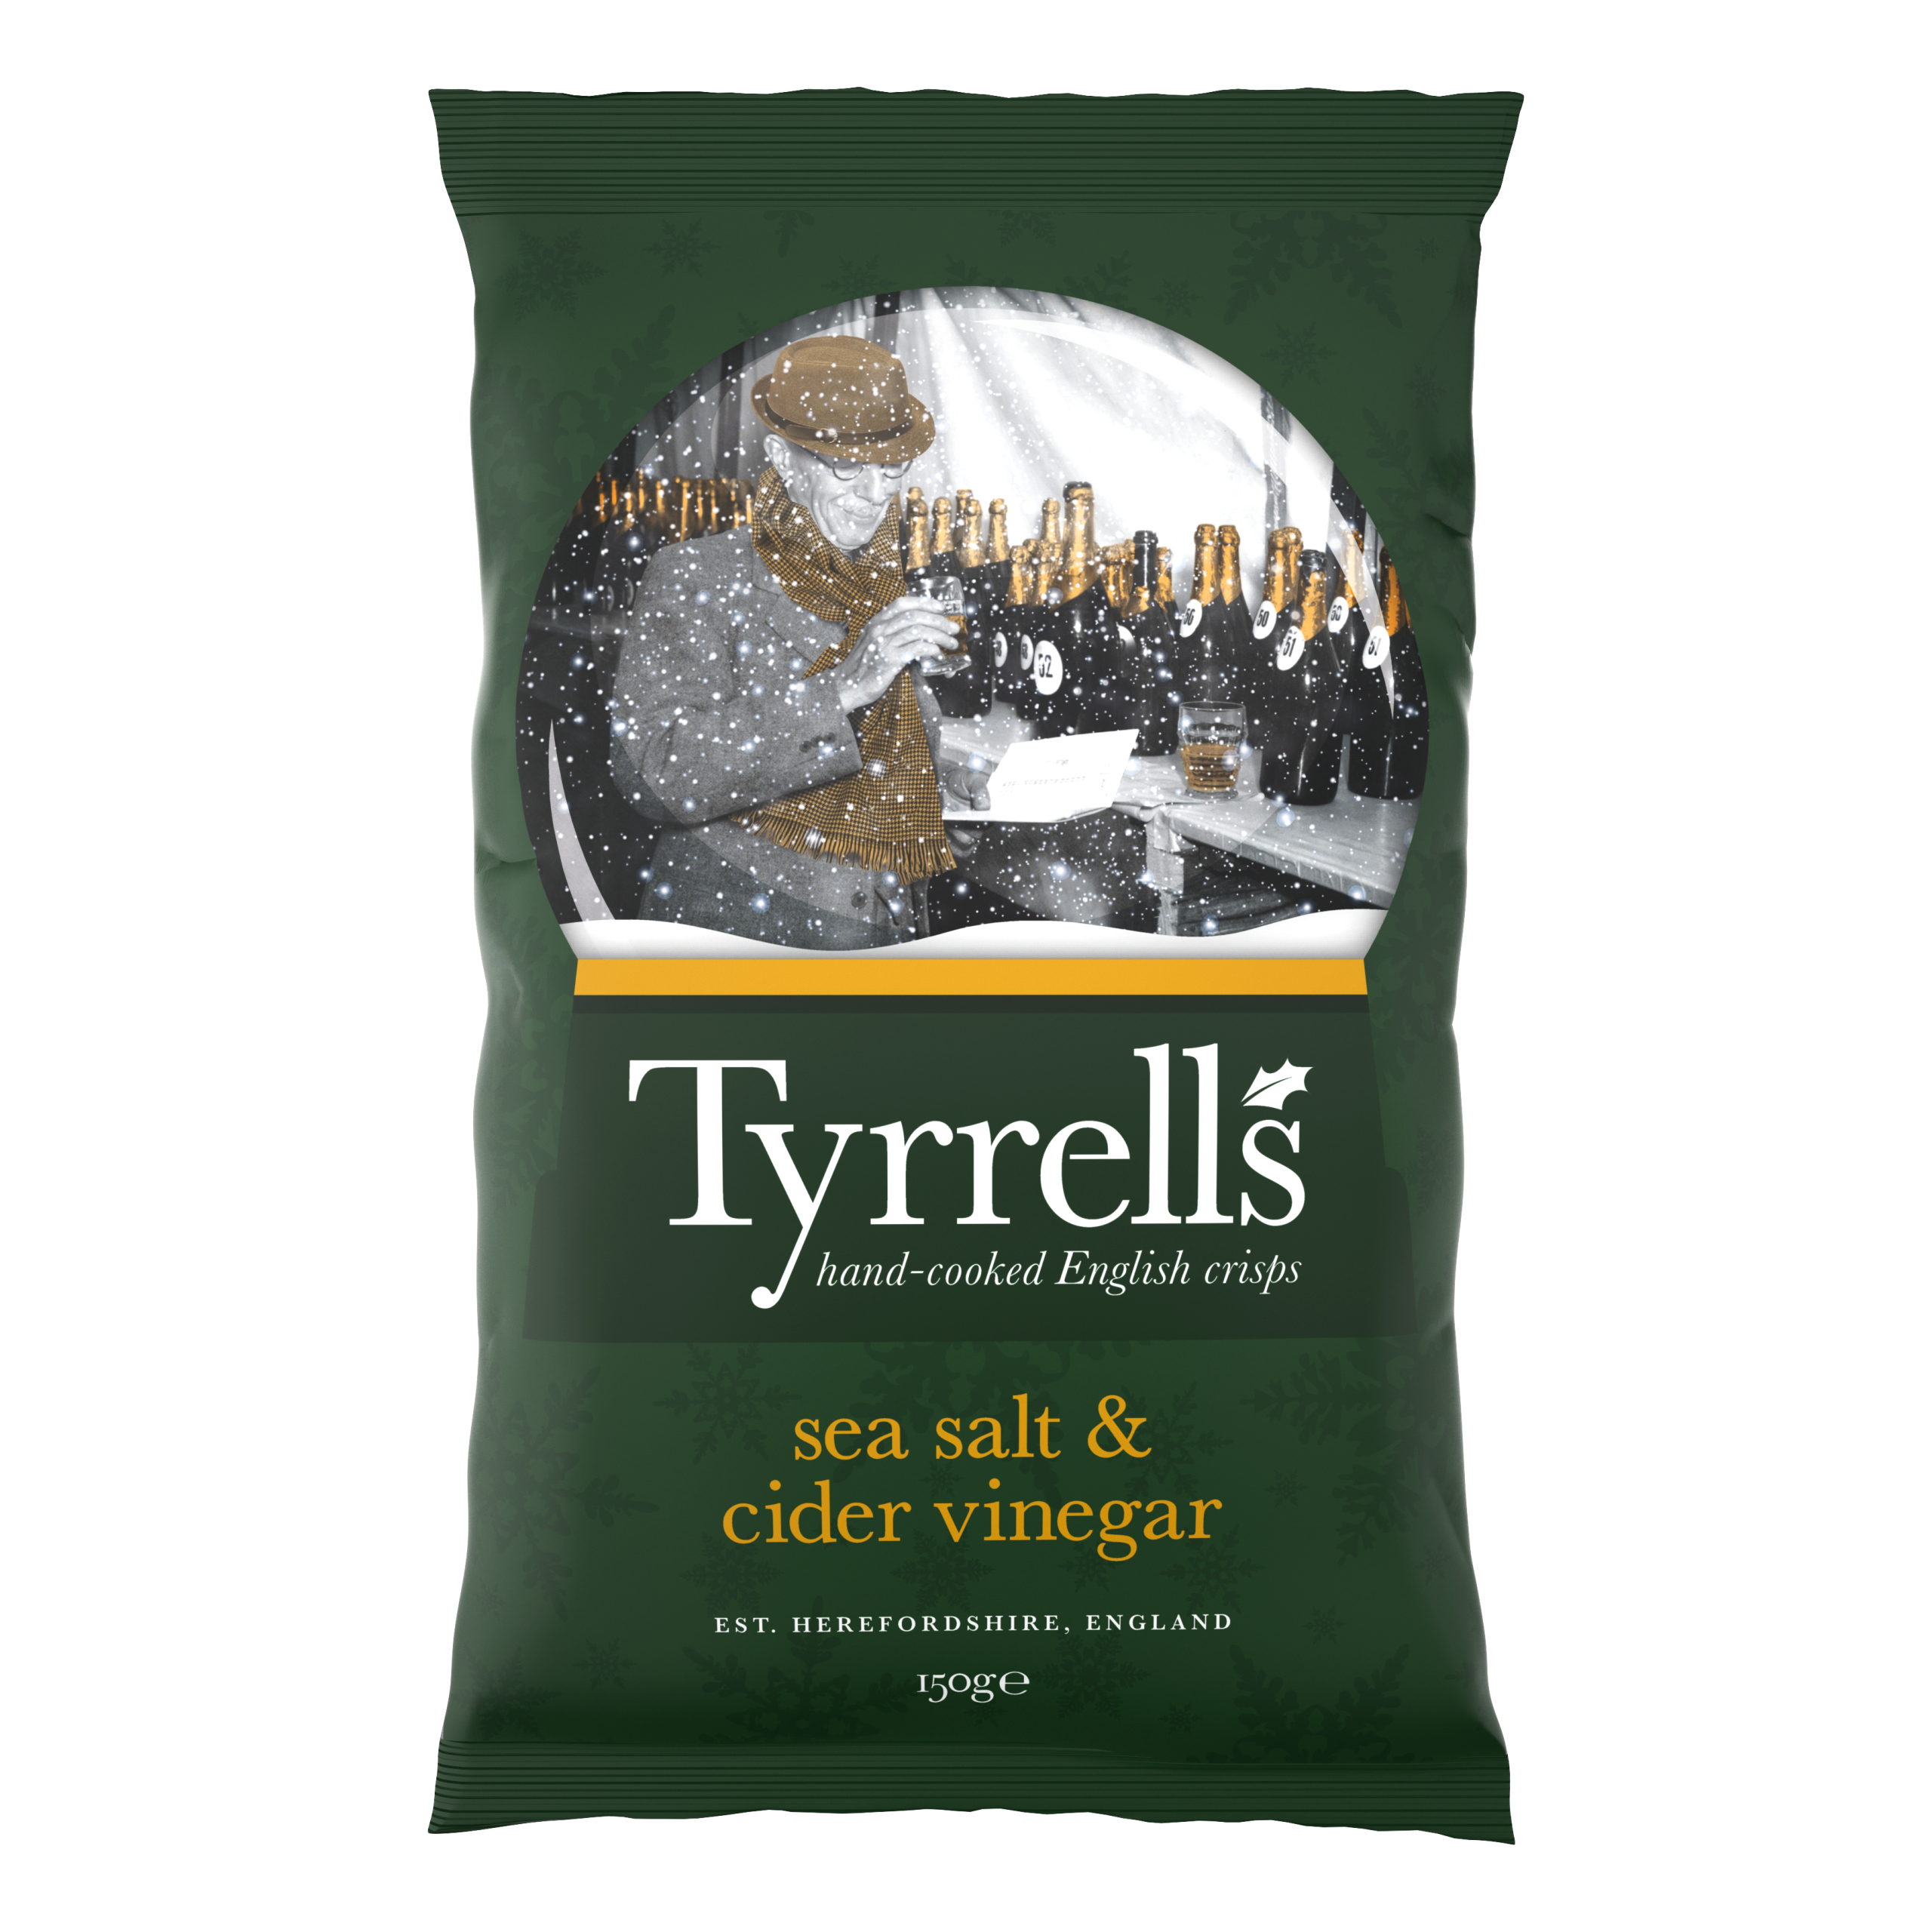 KP Snacks launches festive packaging for Tyrrells